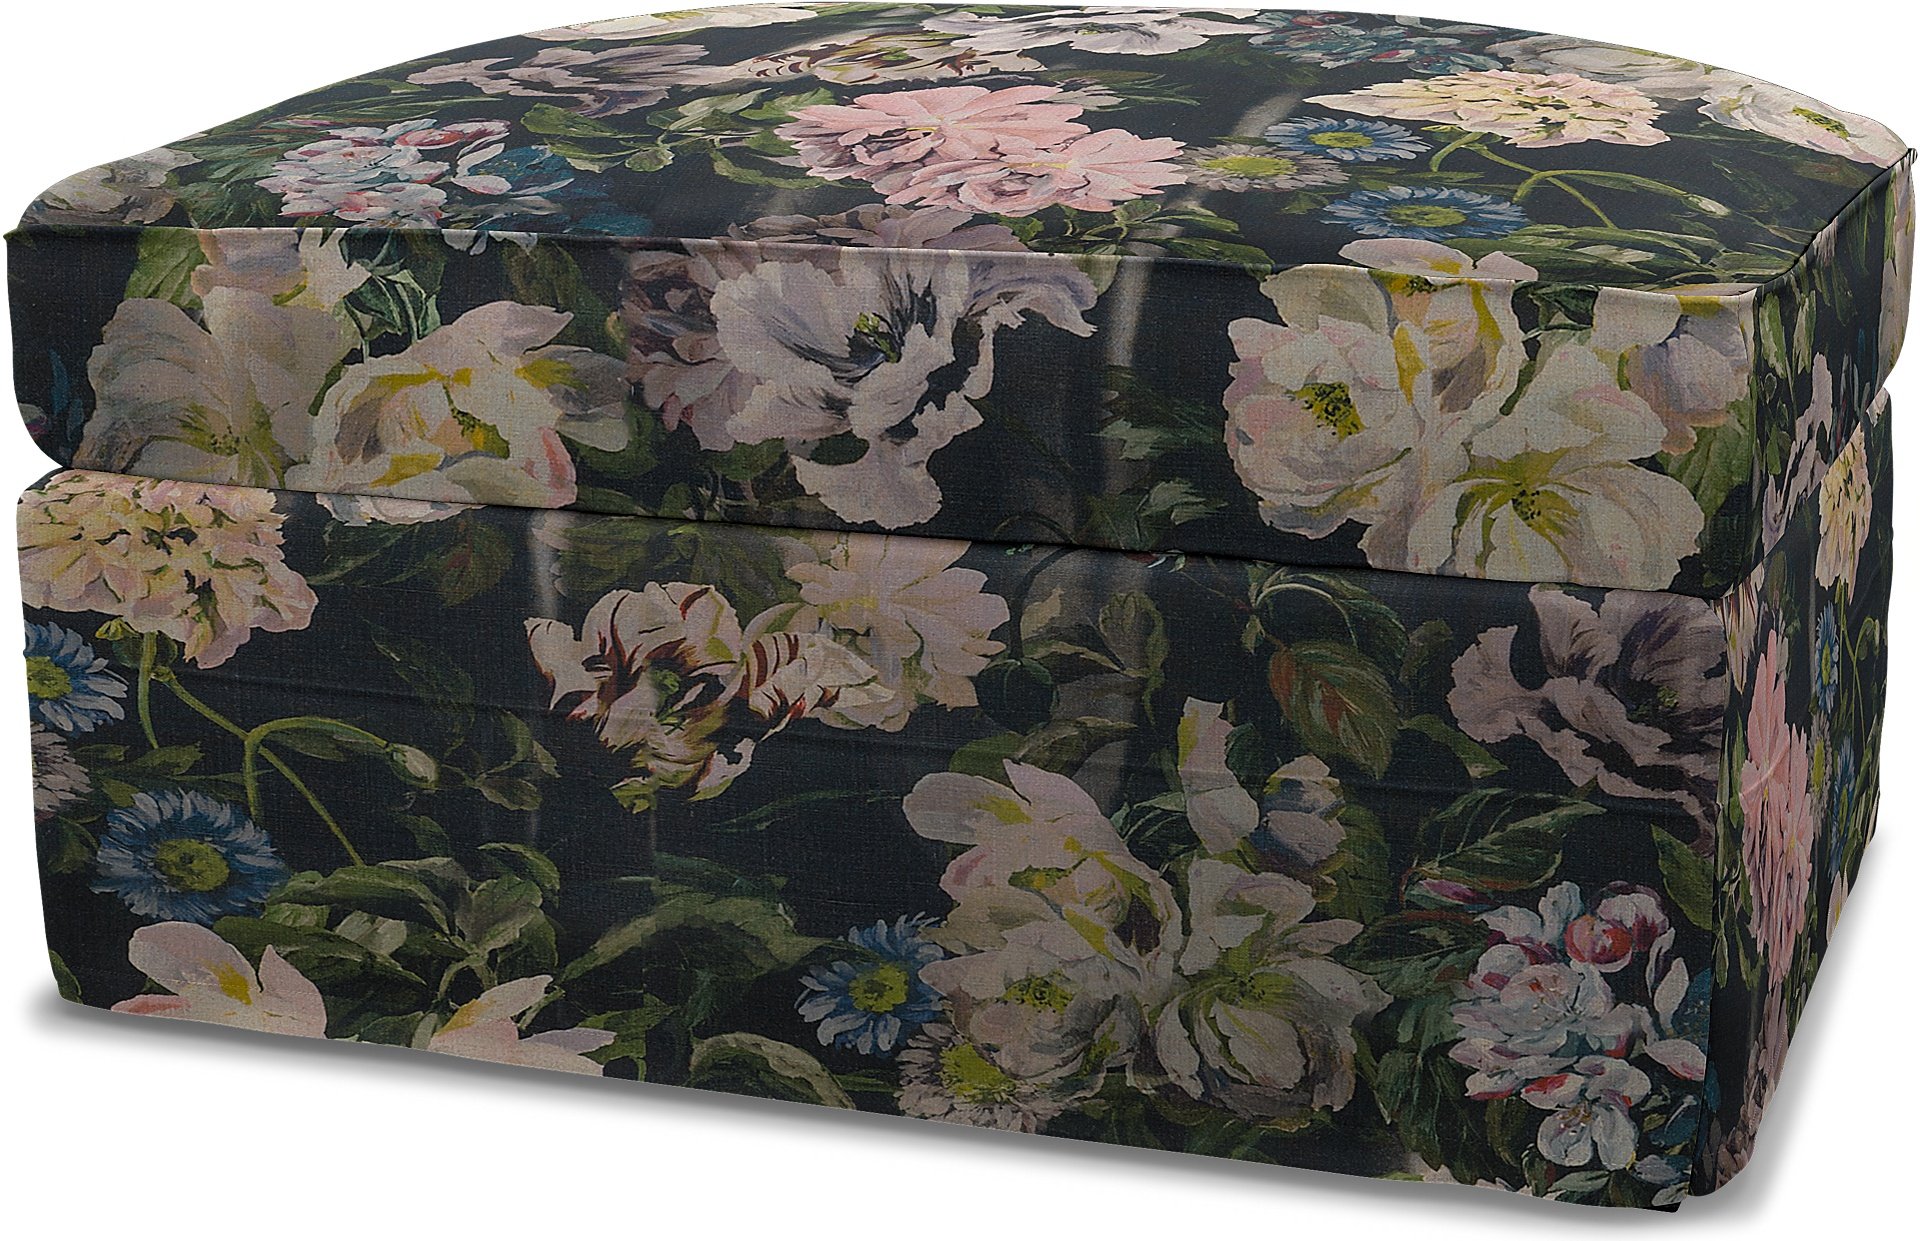 IKEA - Gronlid Footstool with Storage Cover, Delft Flower - Graphite, Linen - Bemz